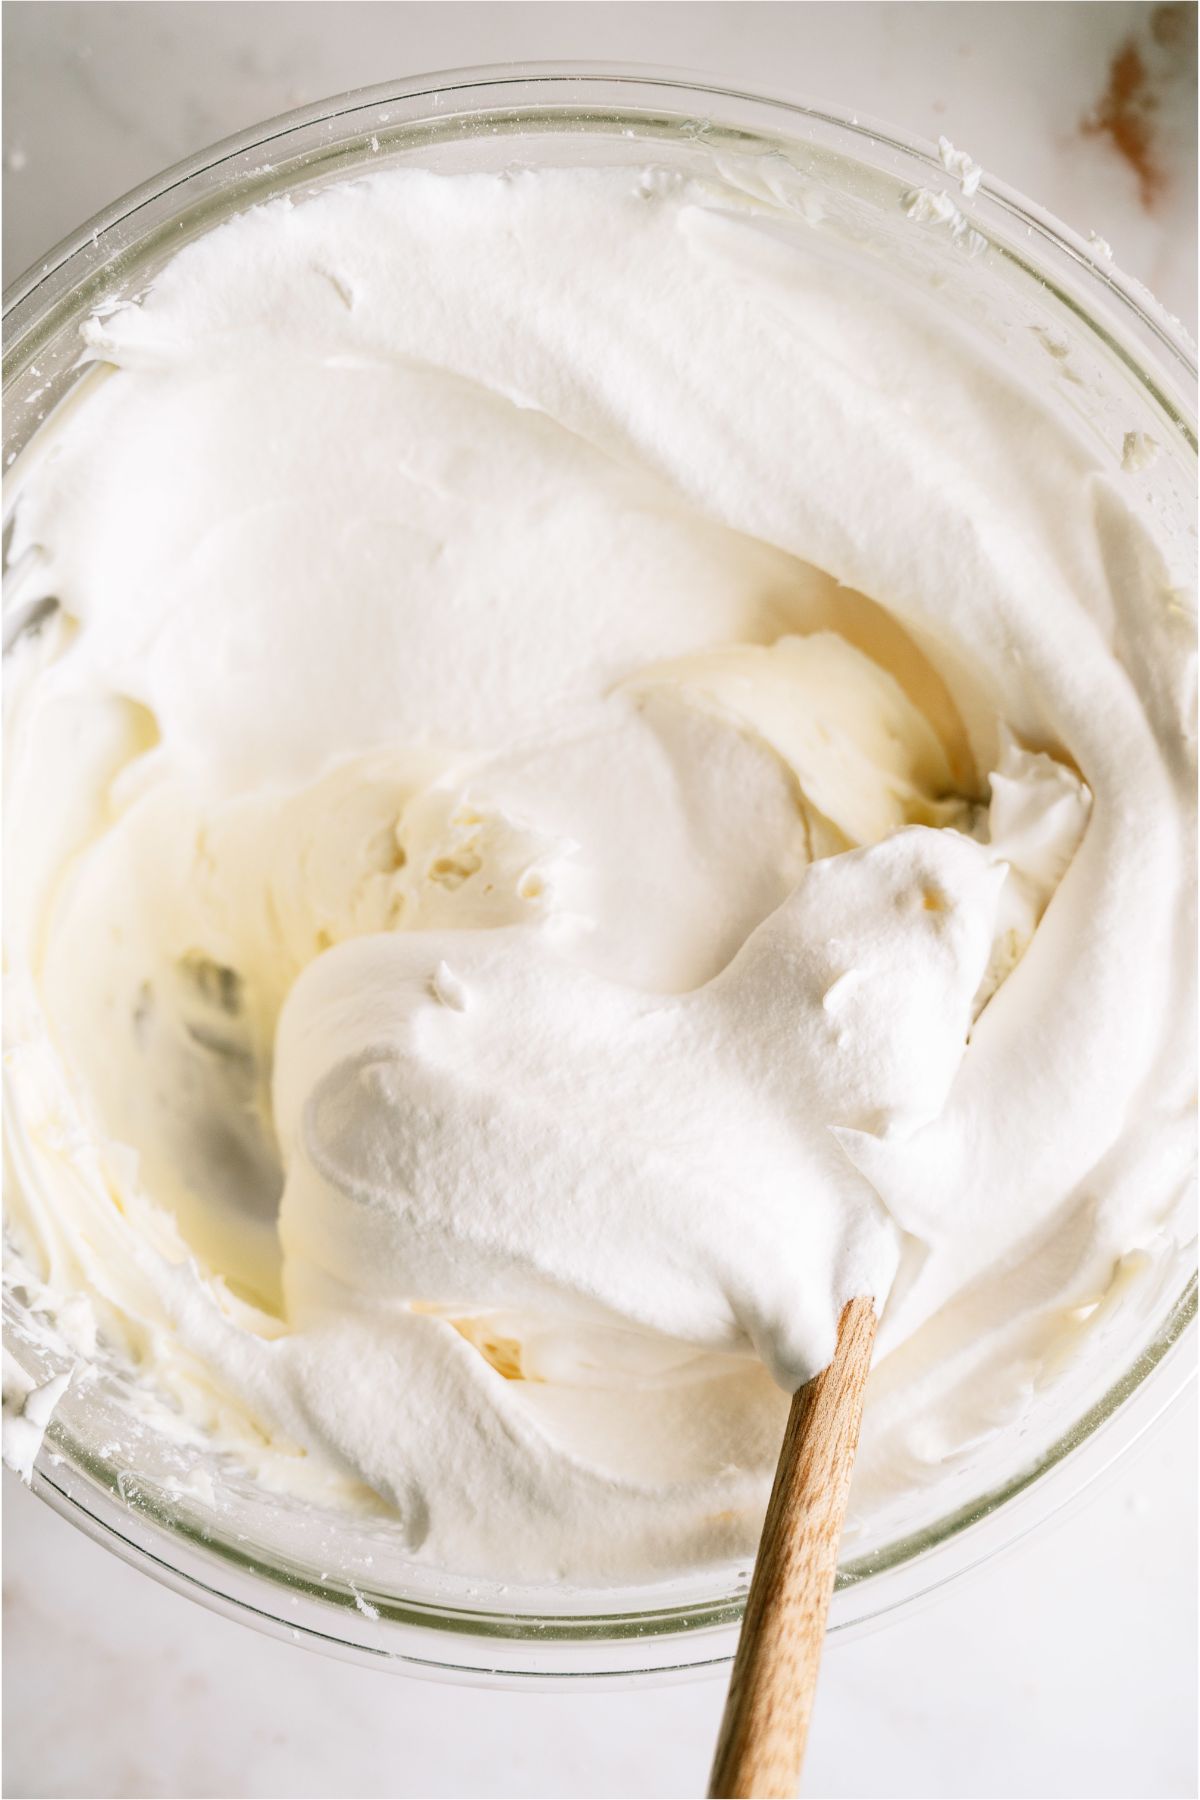 Adding cool whip to the cream cheese mixture in a mixing bowl